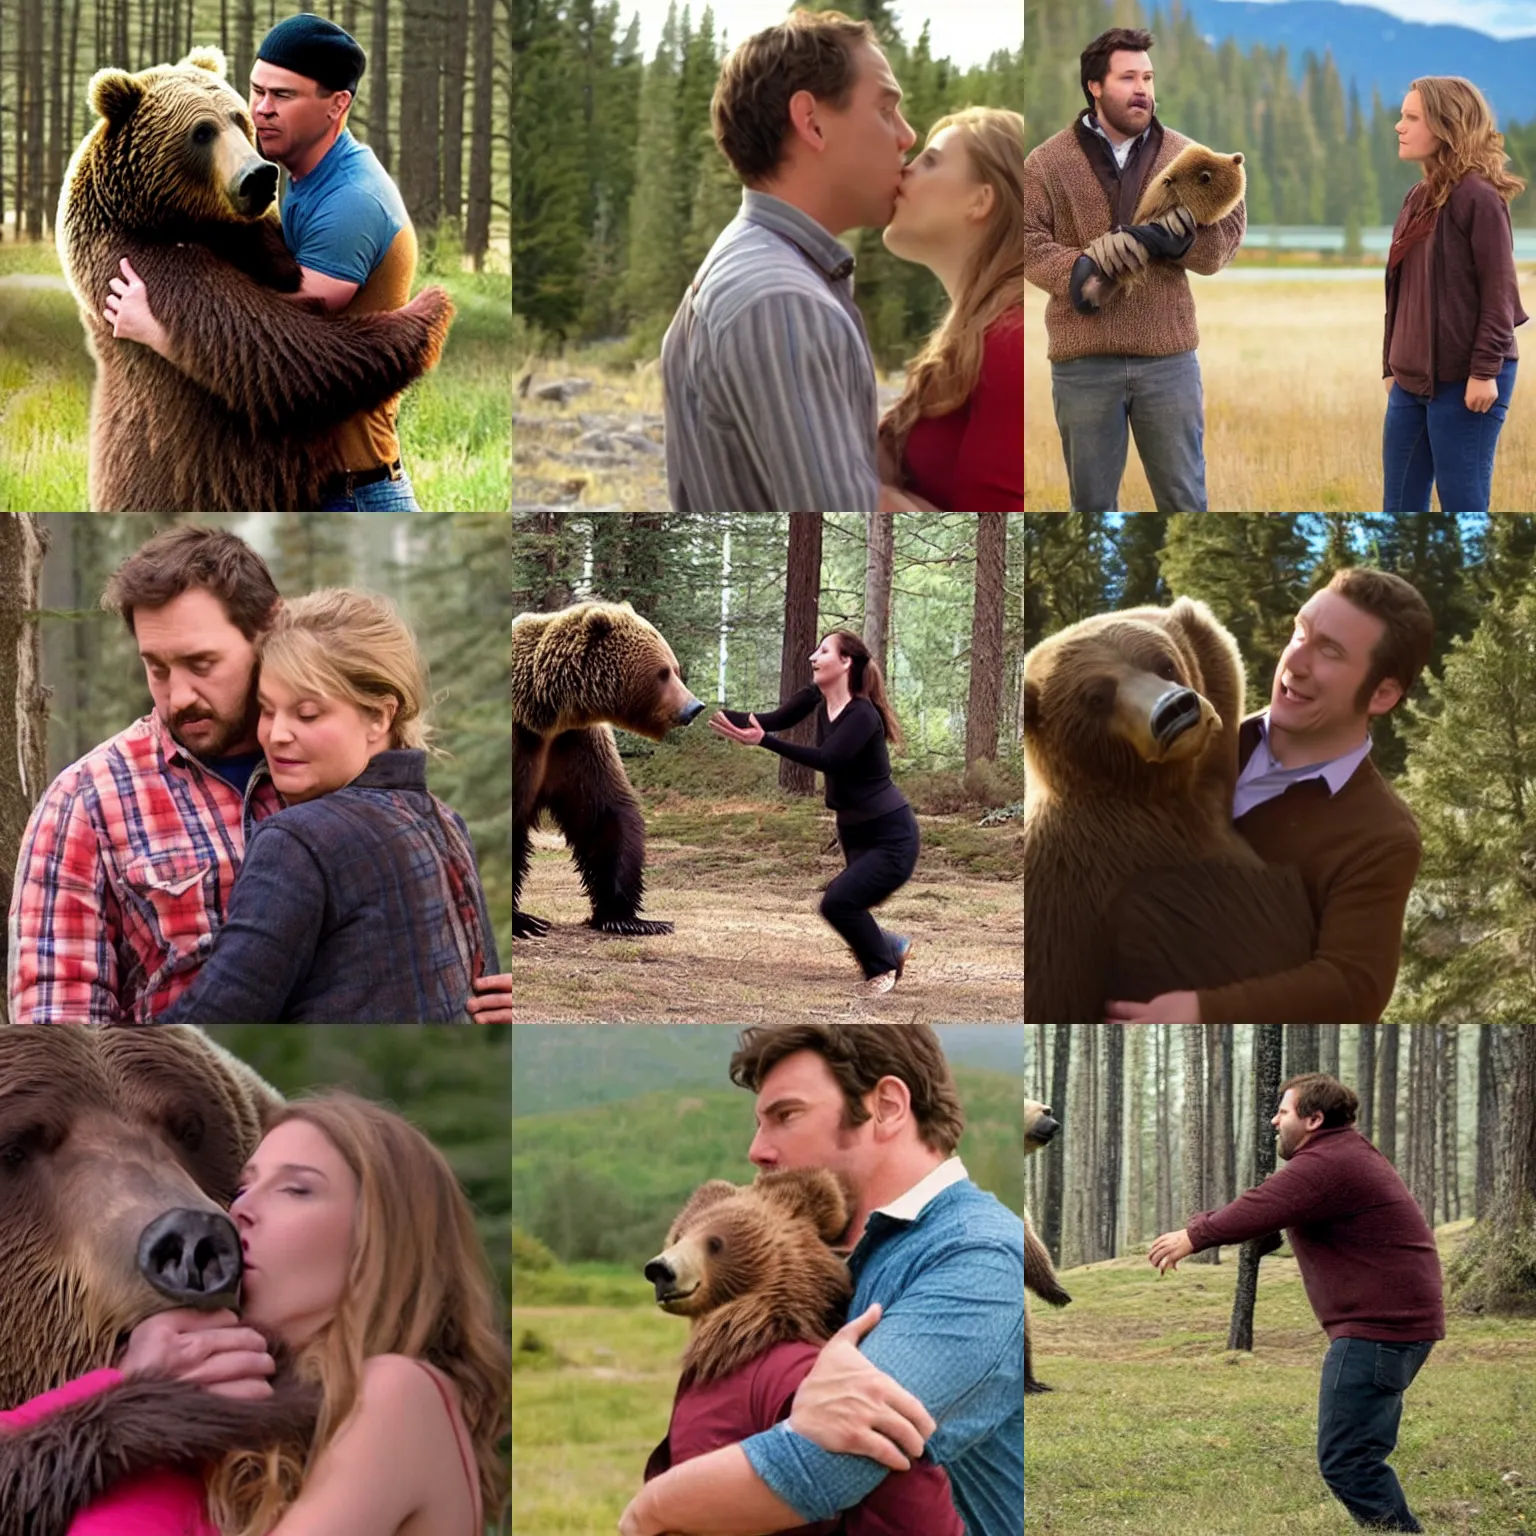 Prompt: Movie Still from Romantic Comedy Reasons to Hug starring A Grizzly Bear